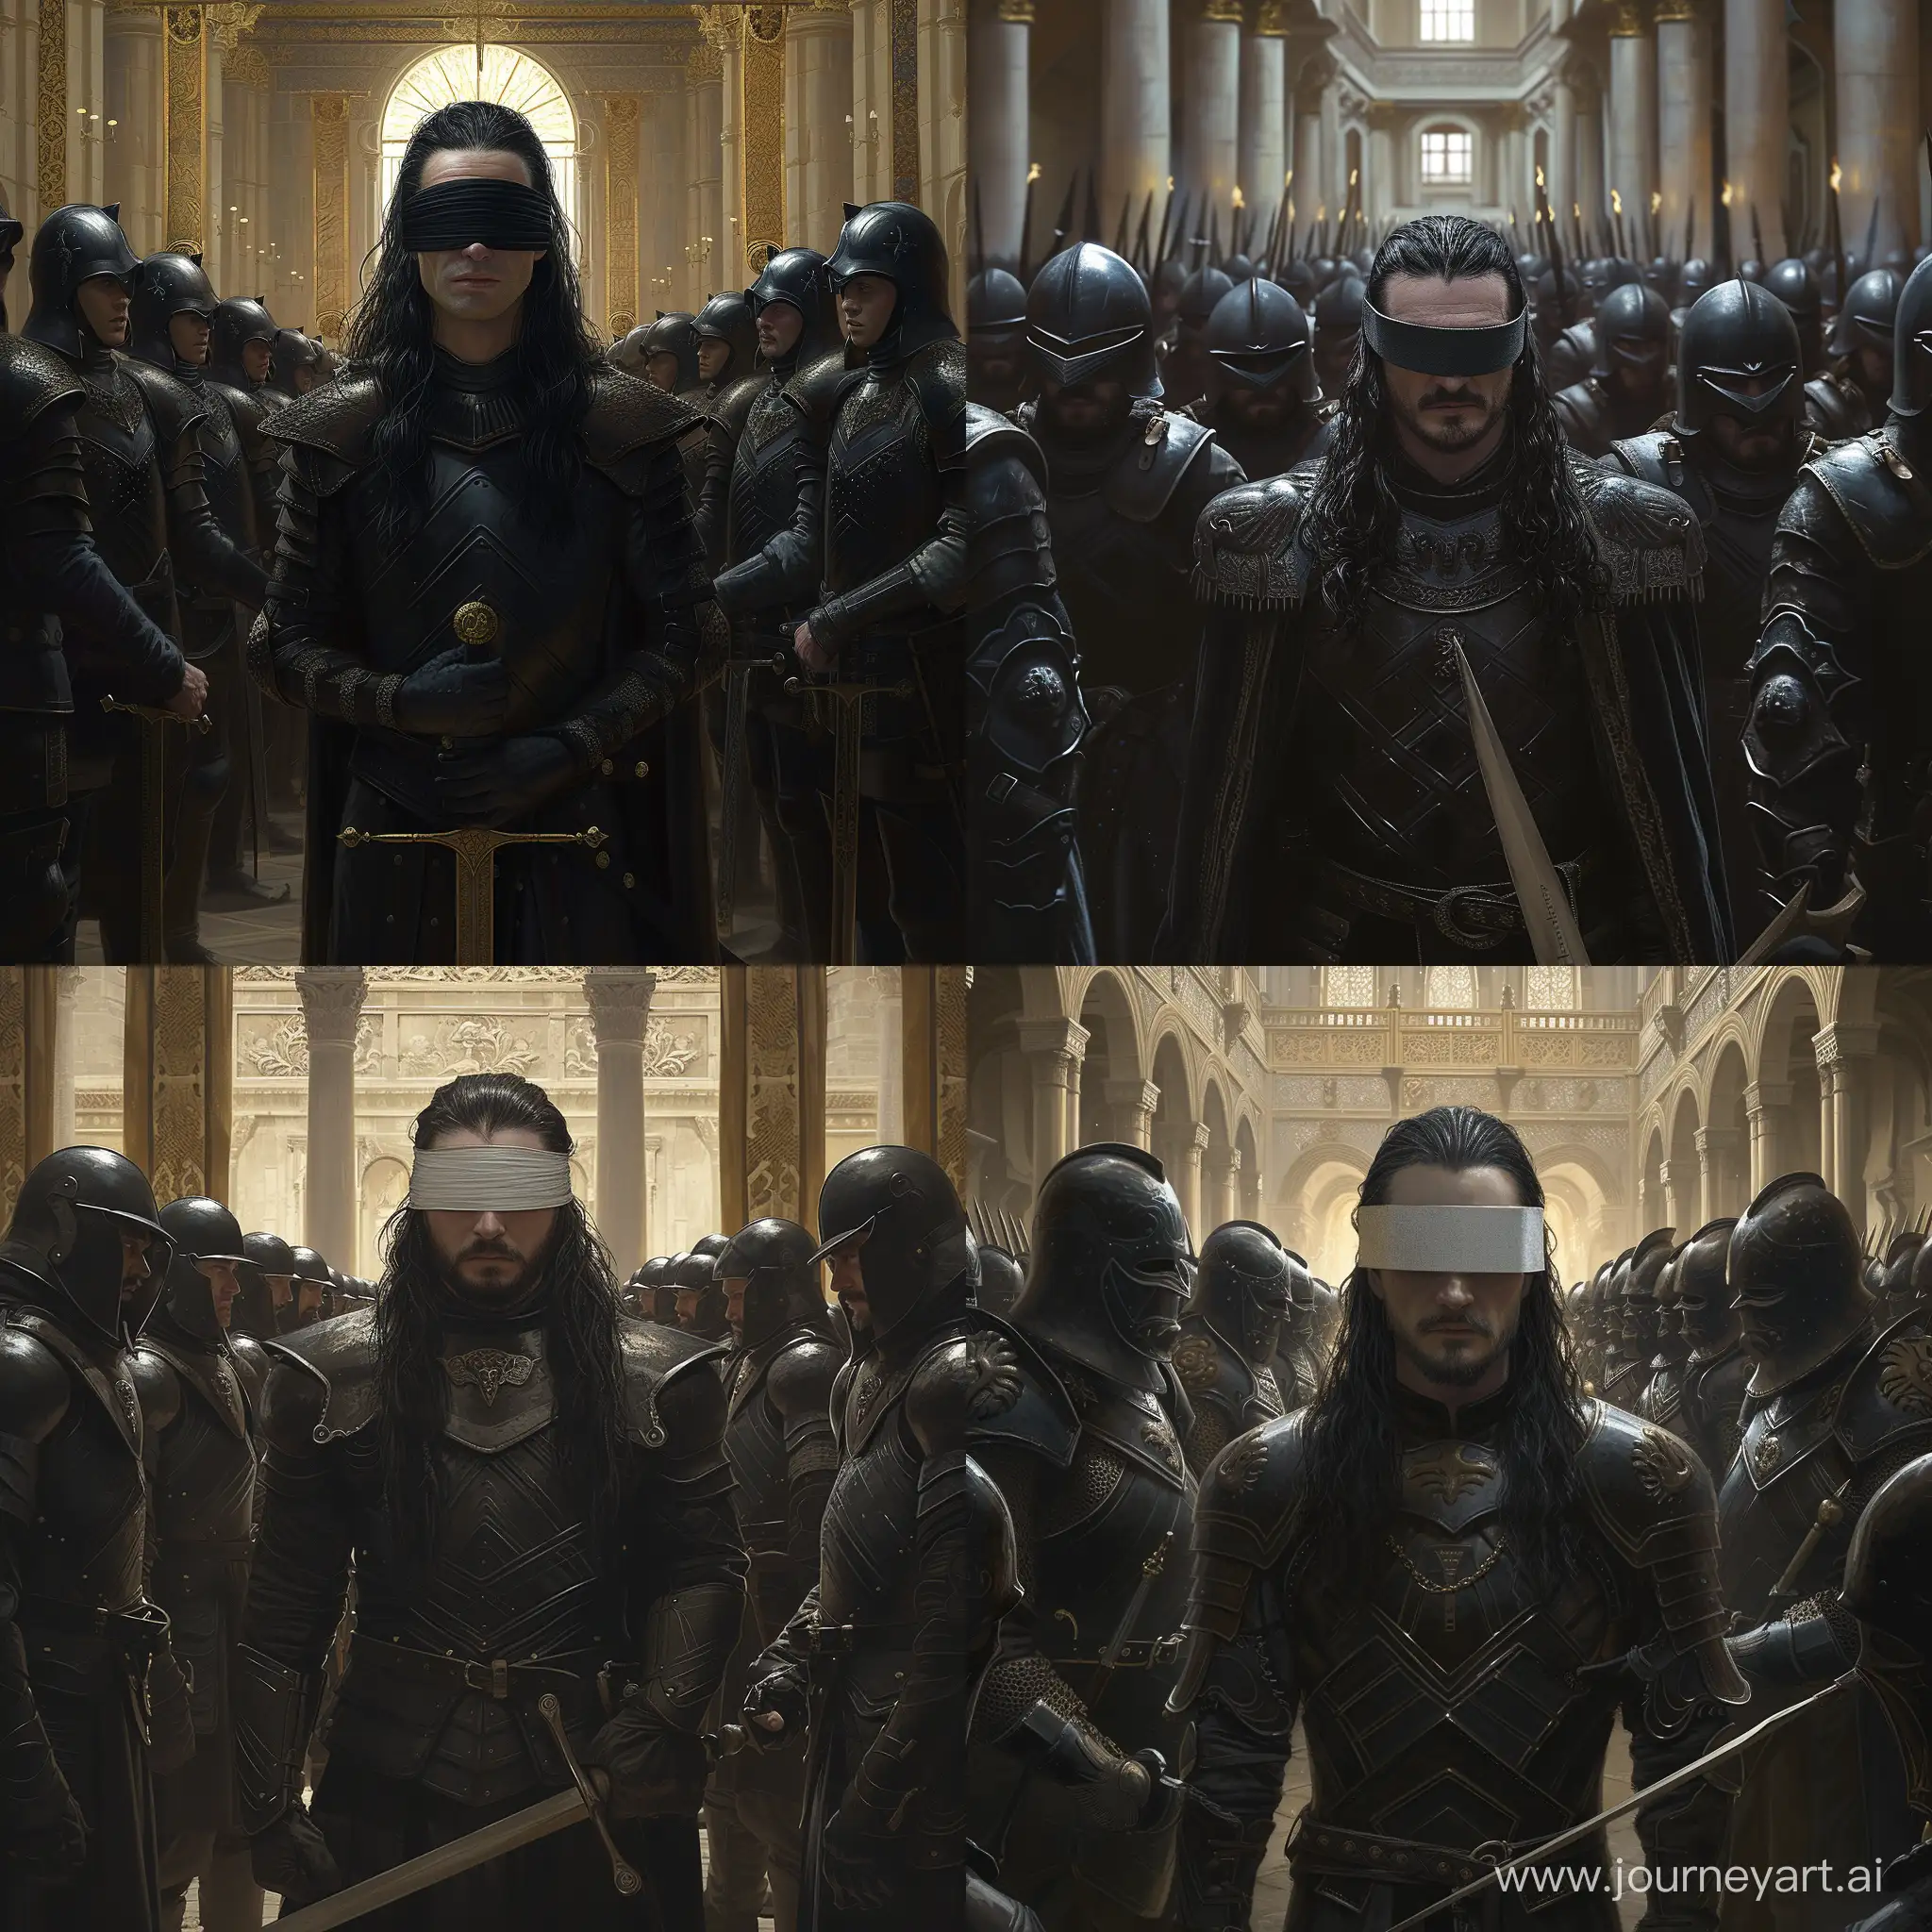 ASOIAF Euron Greyjoy with blindfold on both eyes is surrounded with his guards in black armor. They are standing in the hall of a great castle. There is a valyrian sword in his hand. His long black hair is touching shoulders